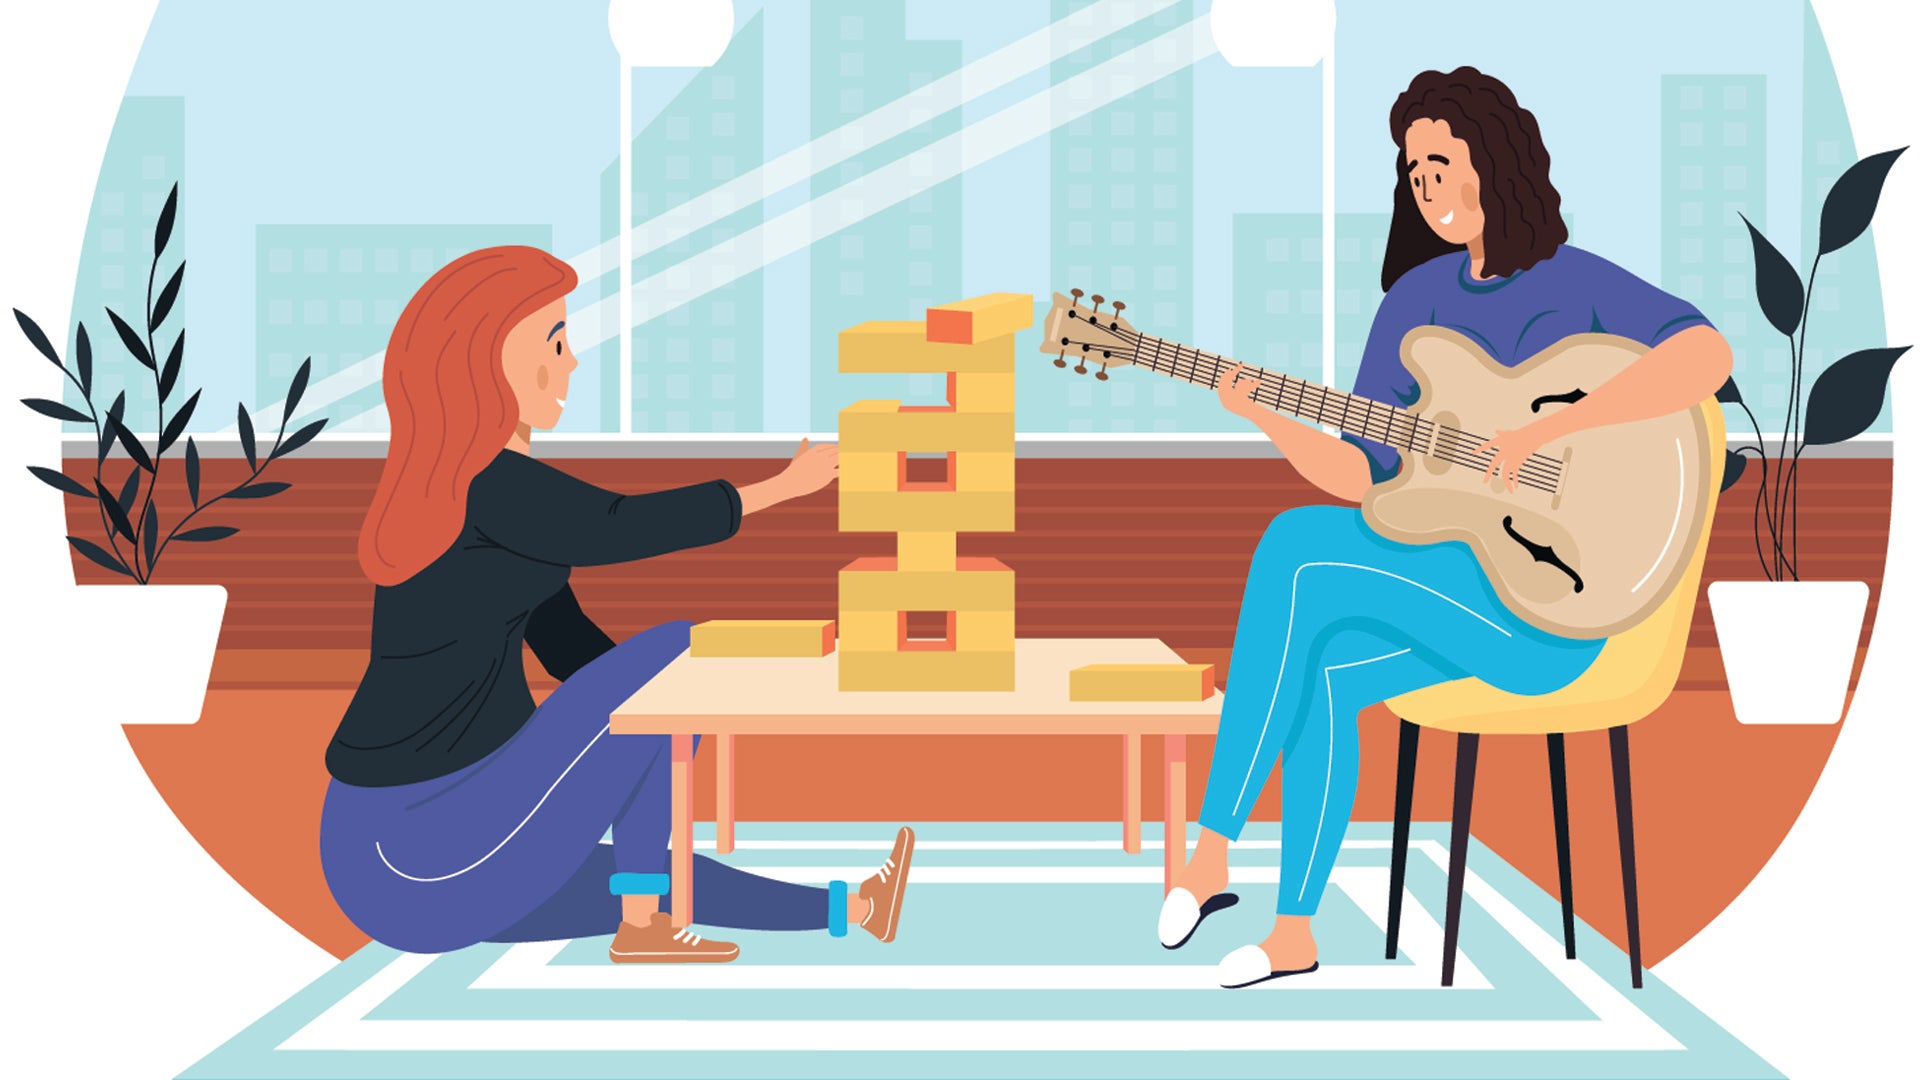 Friends playing a board game while one person plays a musical instrument